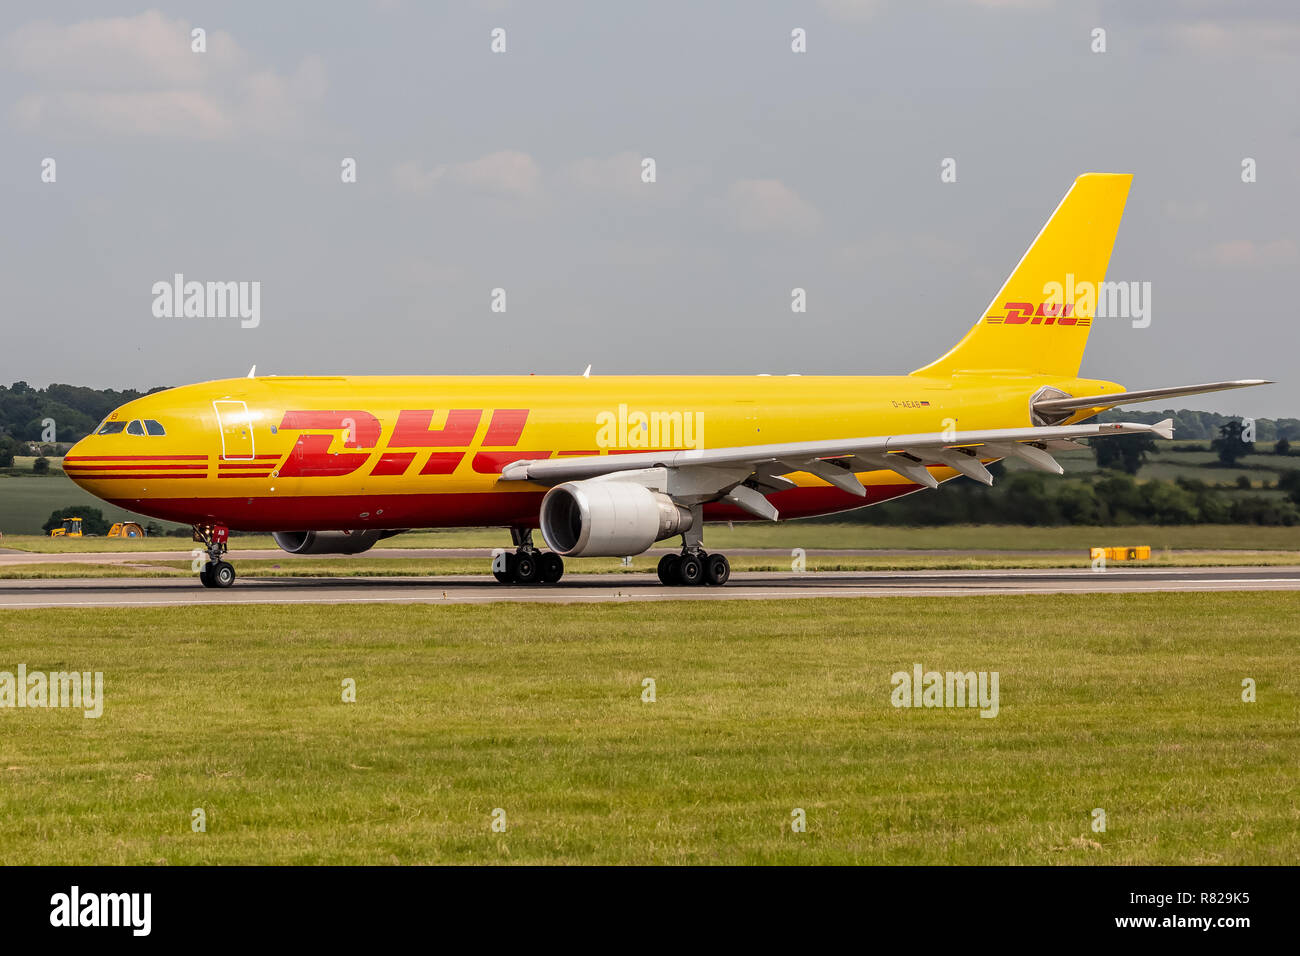 An Airbus A300 cargo aeroplane, D-AEAB, belonging to the international courier, parcel, and express mail service DHL, at London Luton Airport. Stock Photo